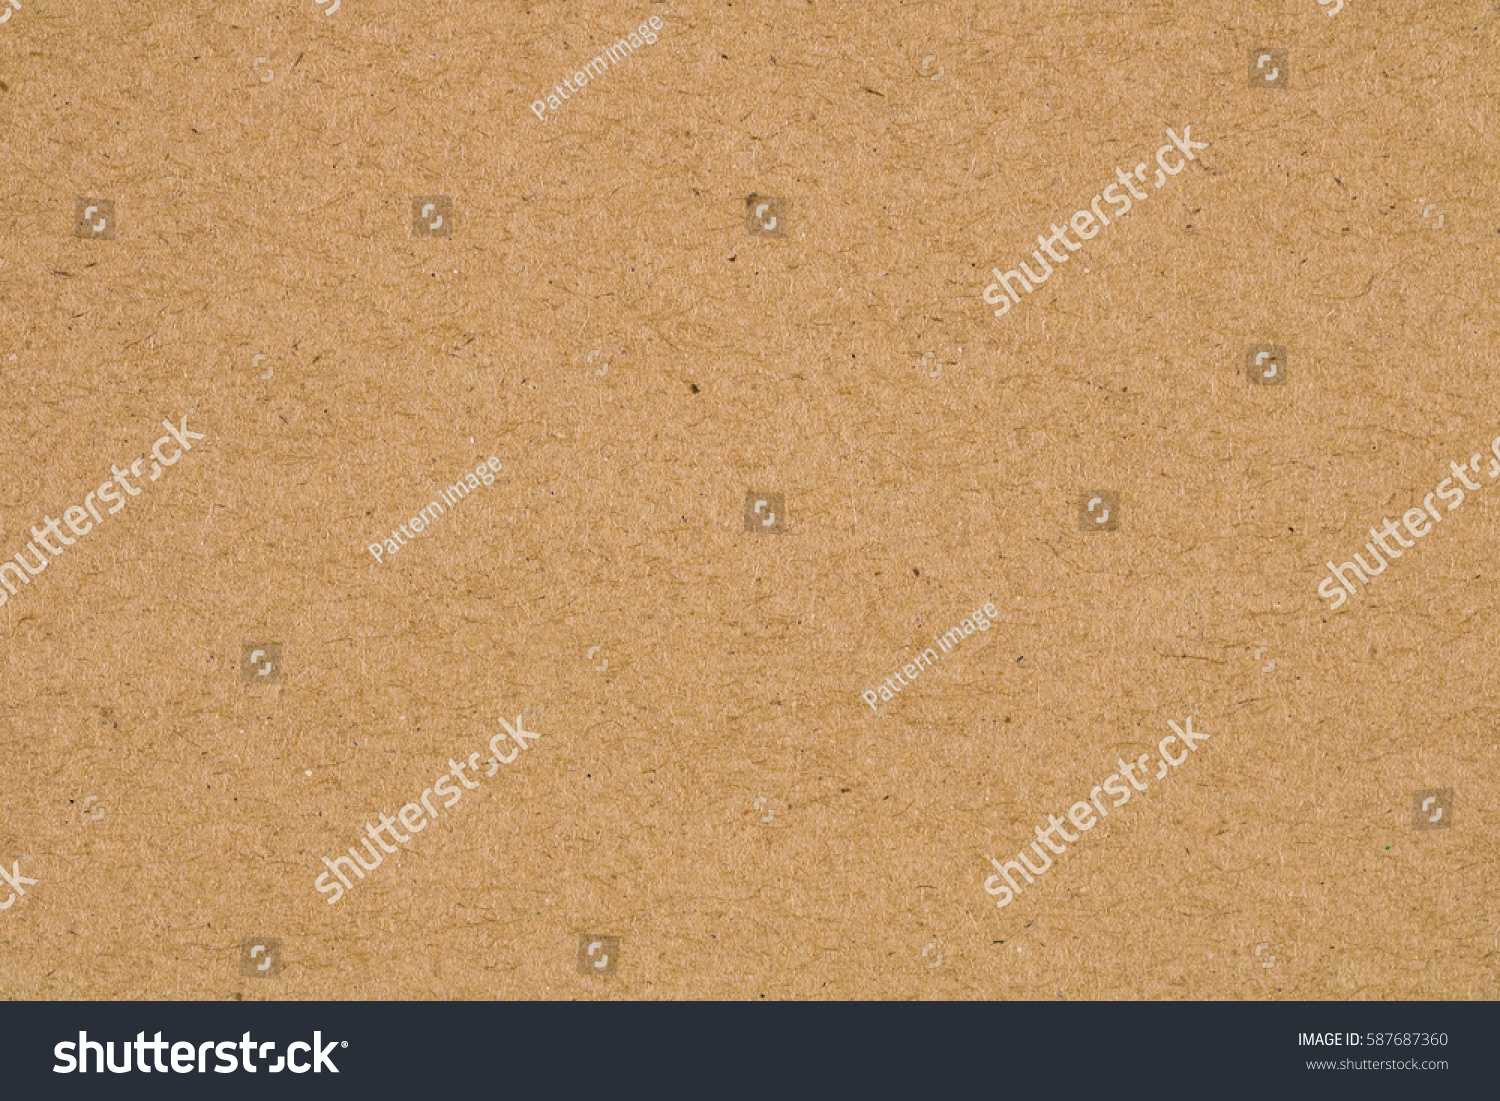 Brown paper close-up #587687360